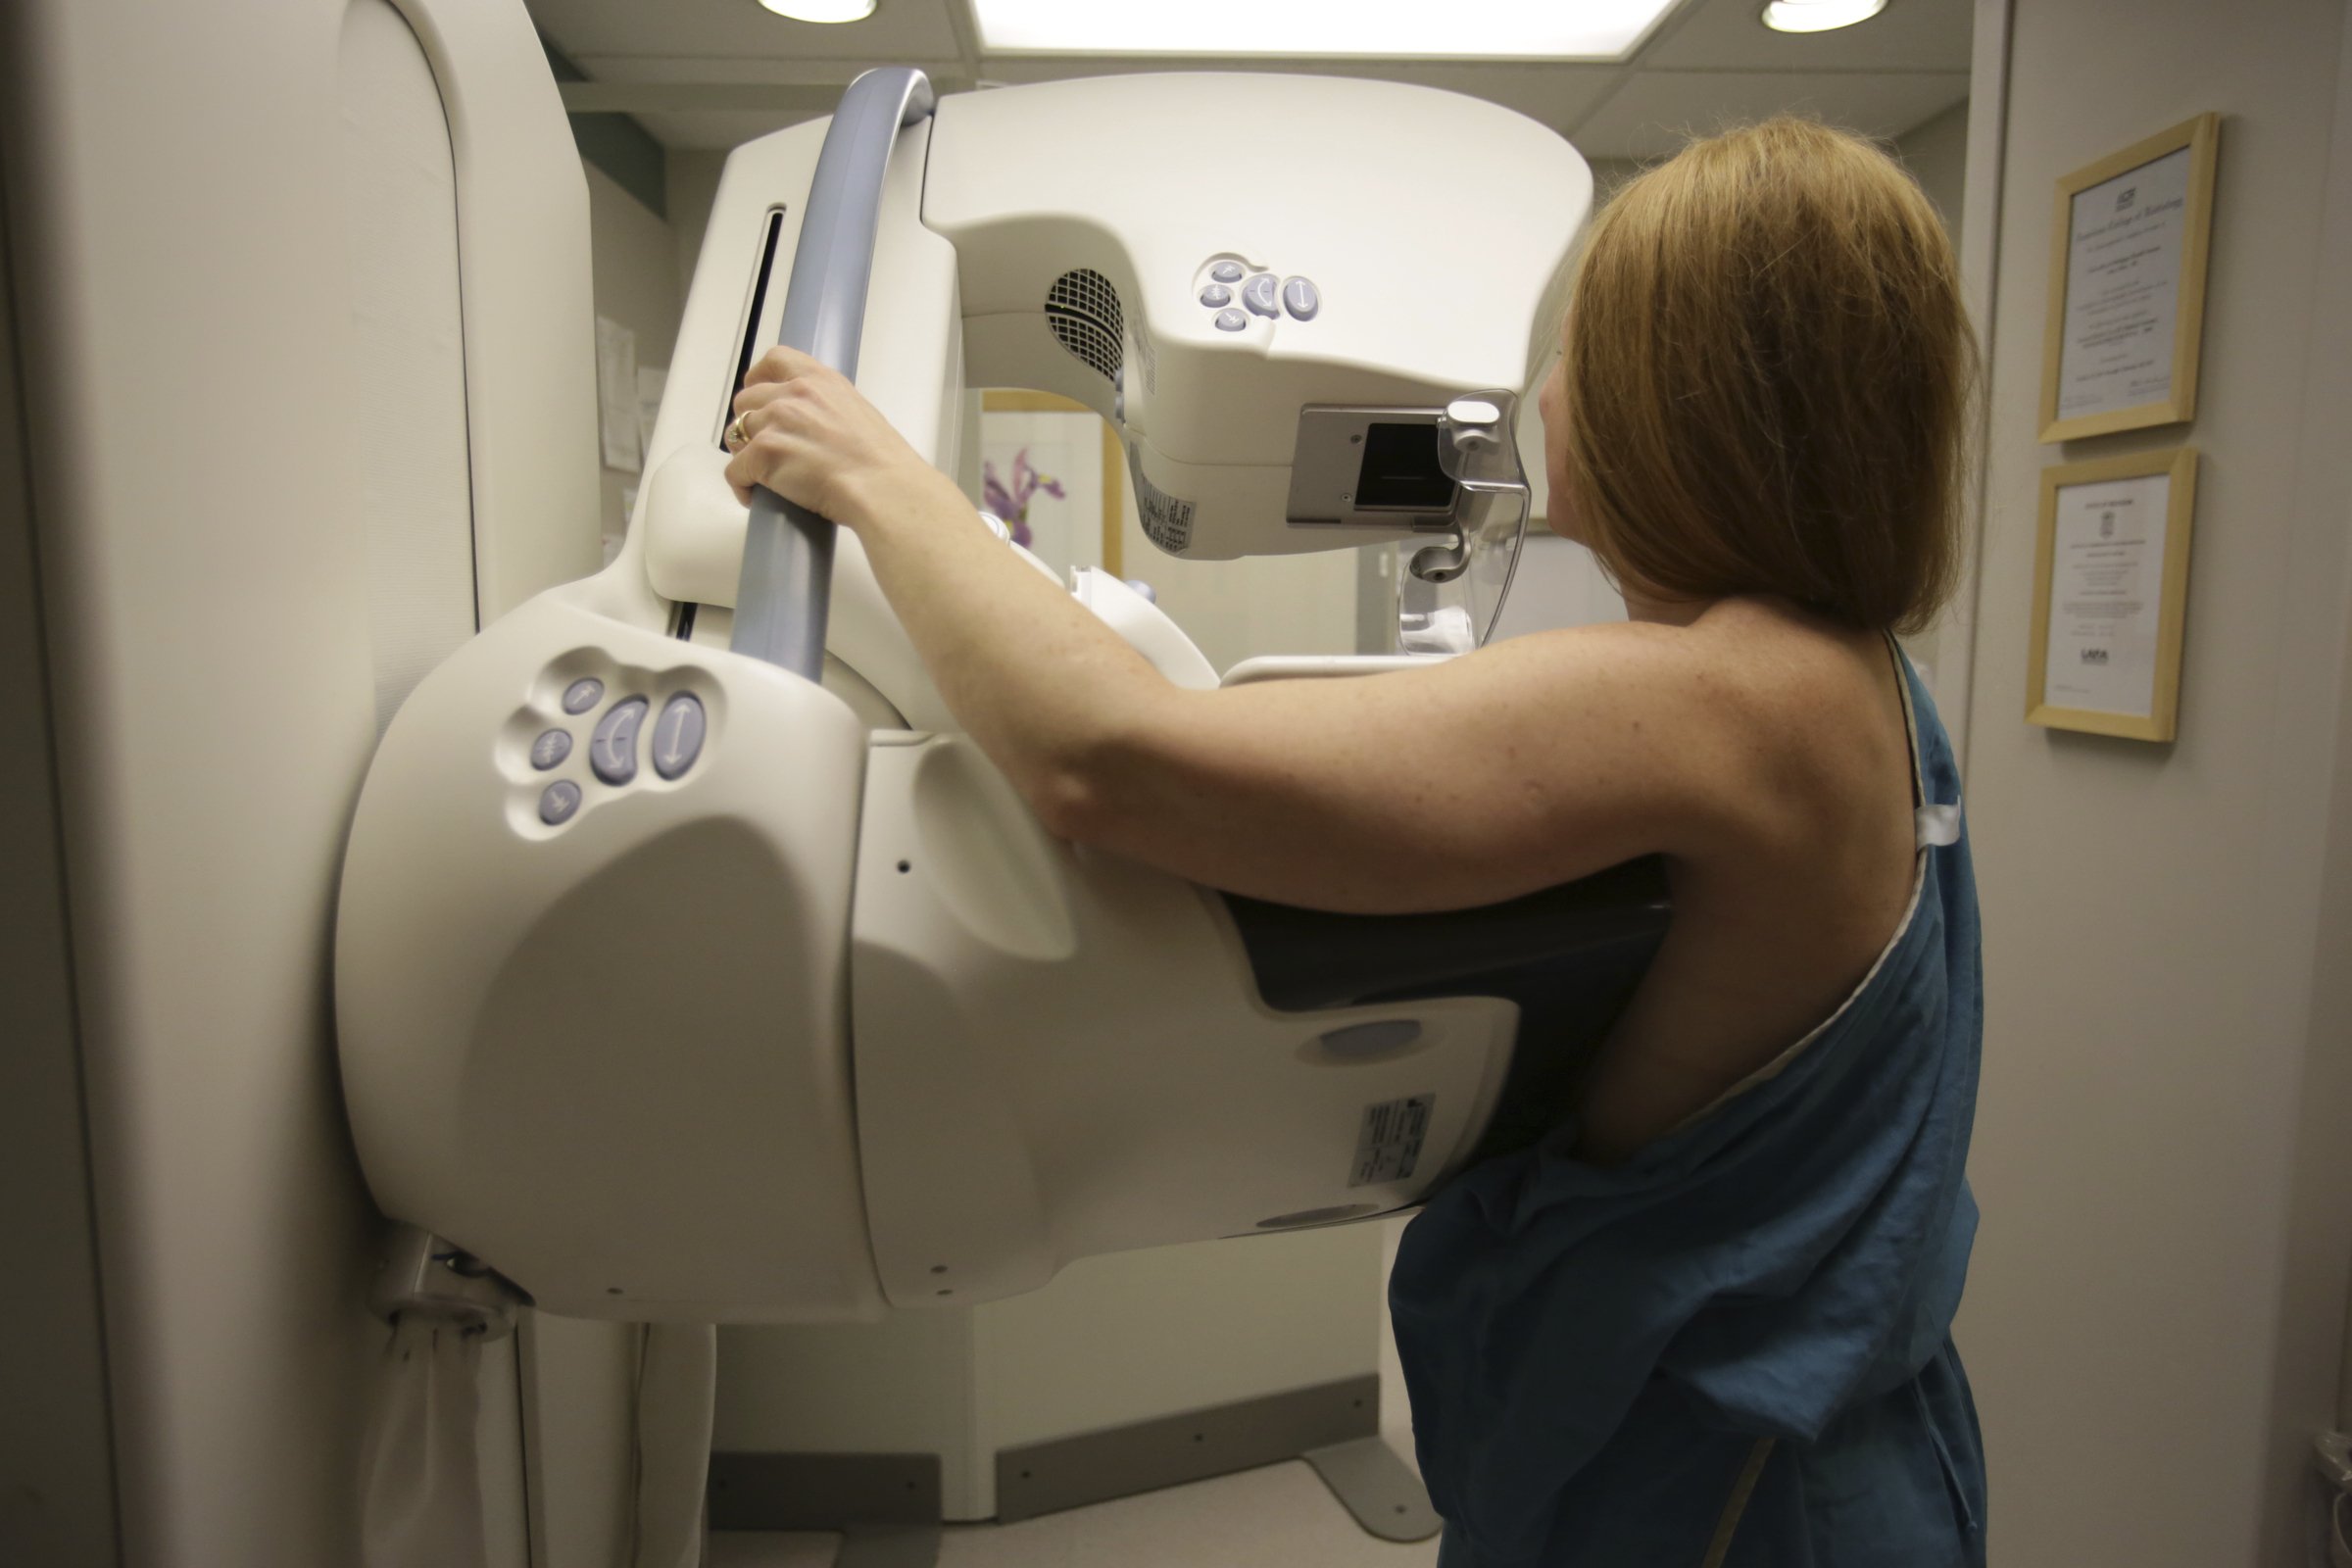 New studies explain which genes may increase the risk of breast cancer